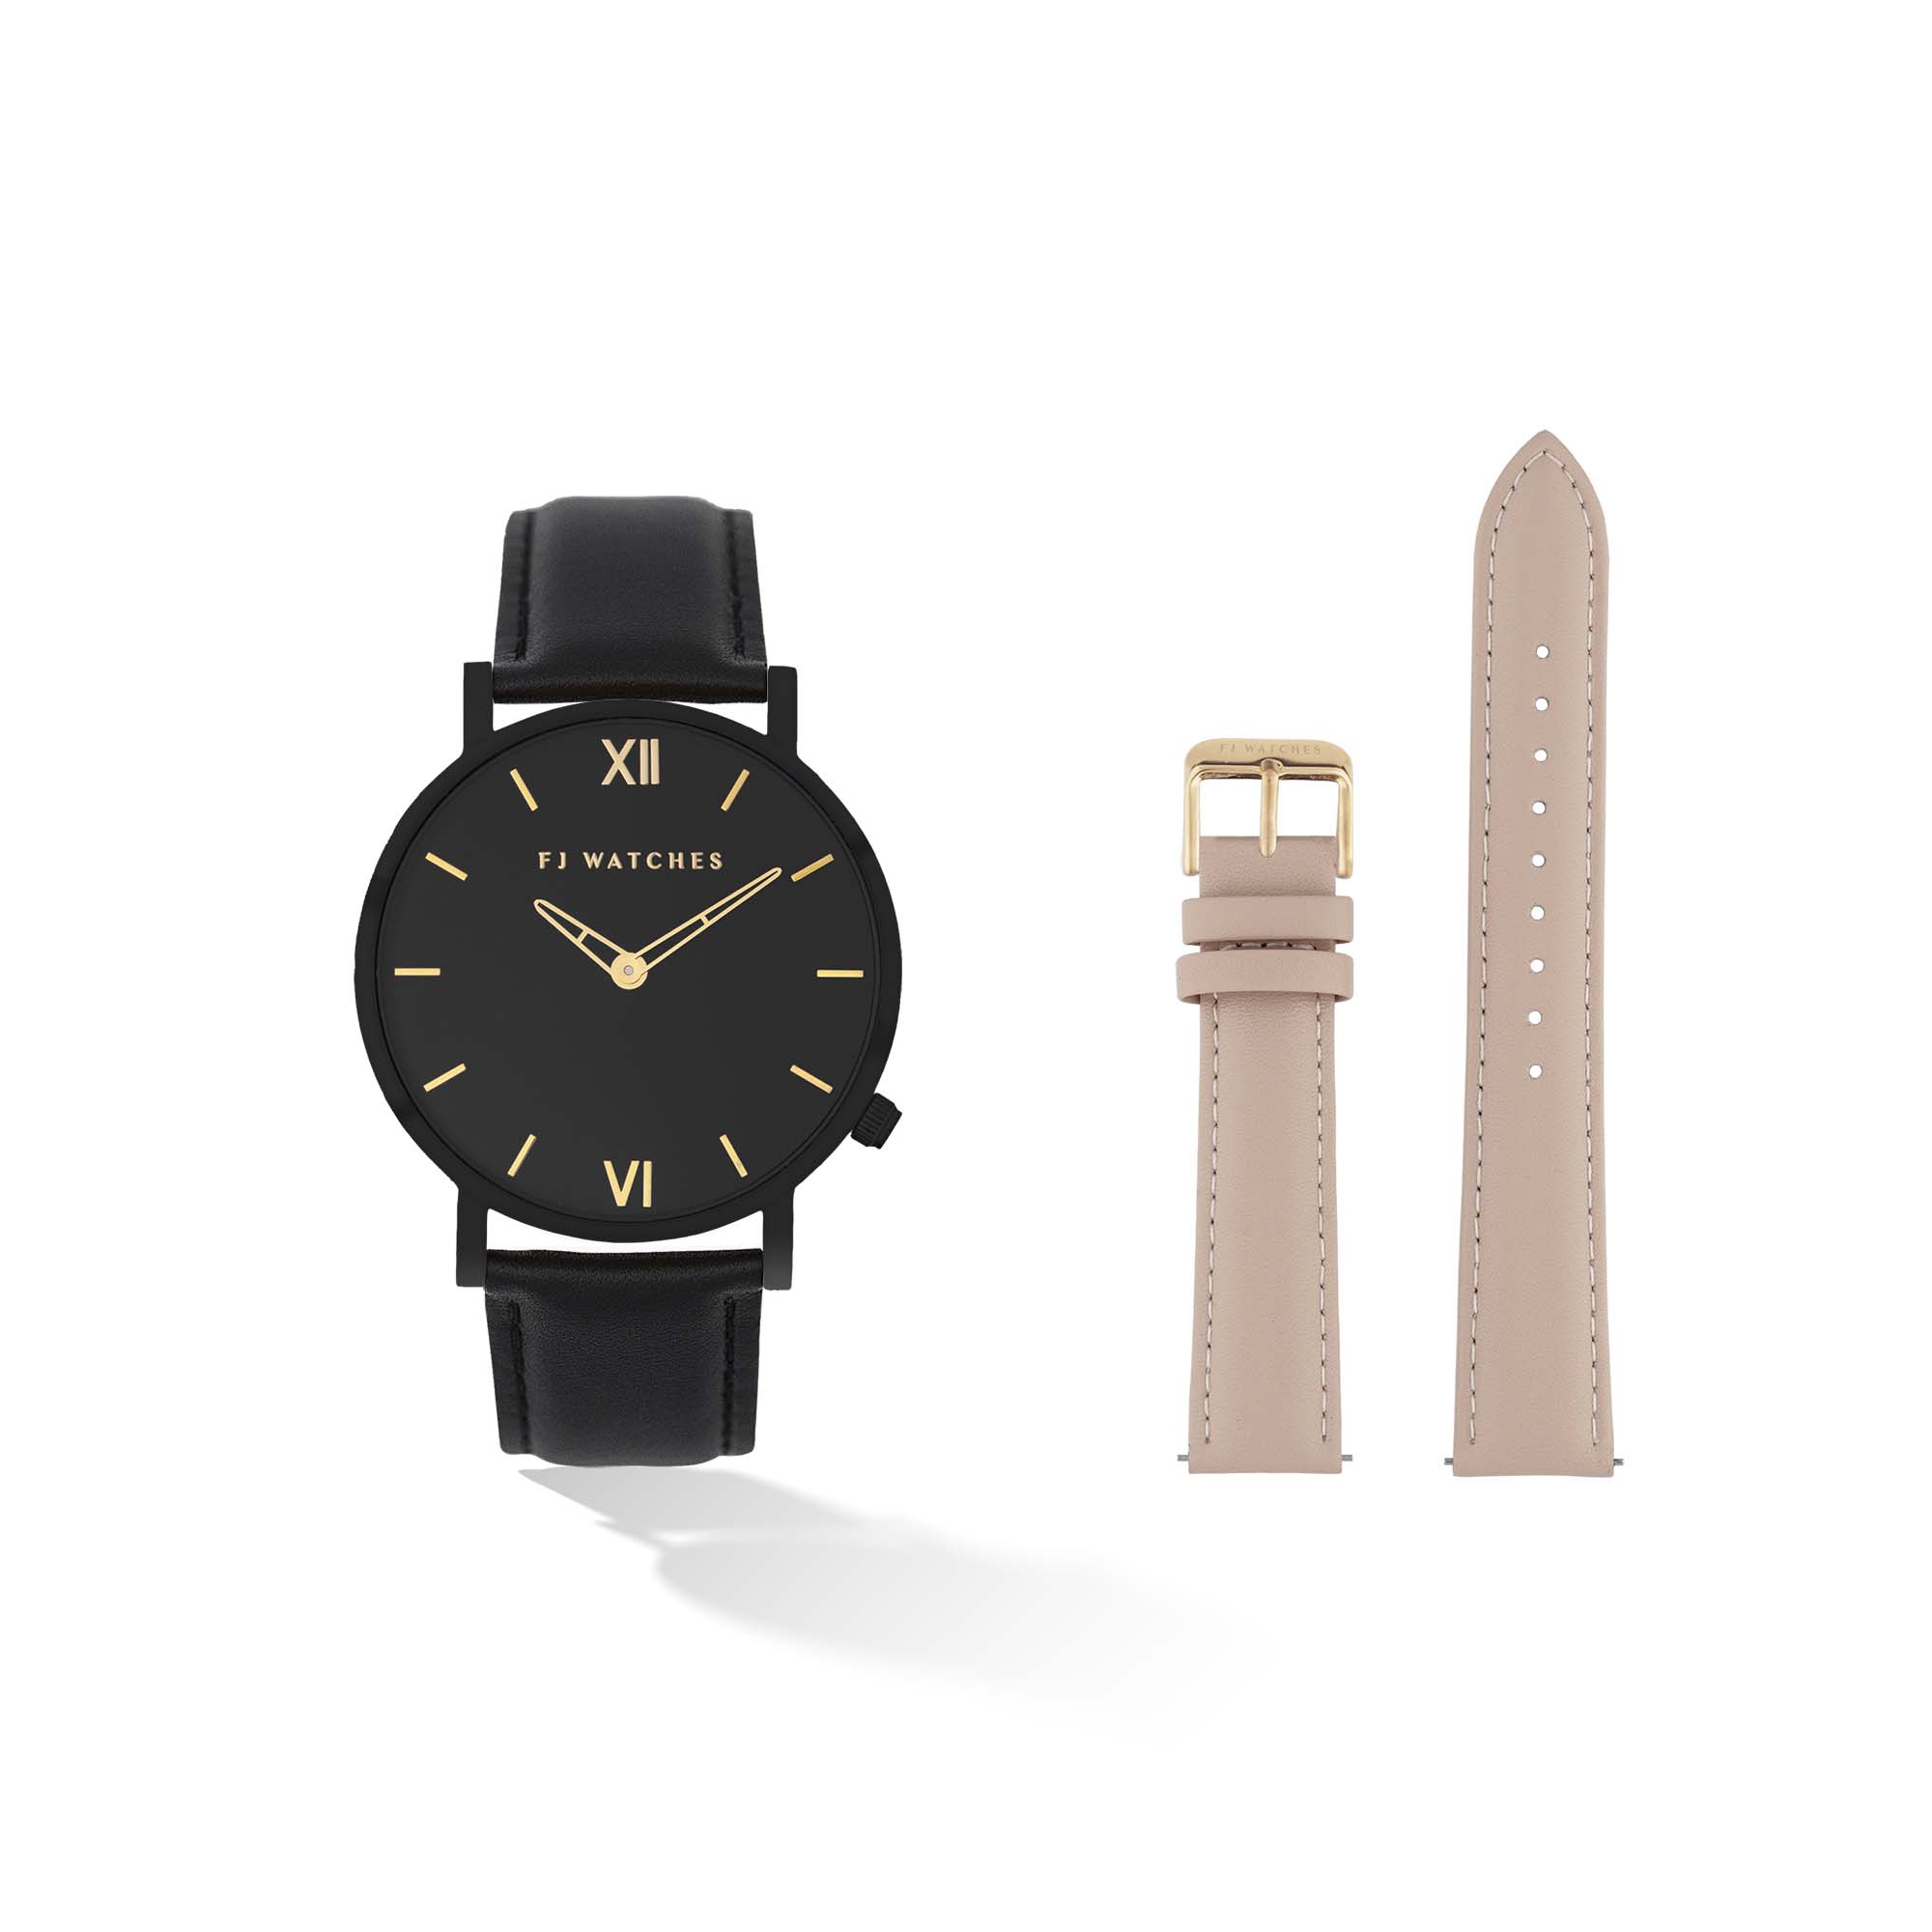 Discover the Oro moon set, a 36mm women's watch signed Five Jwlry with an all-black dial and gold hands. This one comes with a genuine black leather strap and a beige leather strap! The perfect gift!